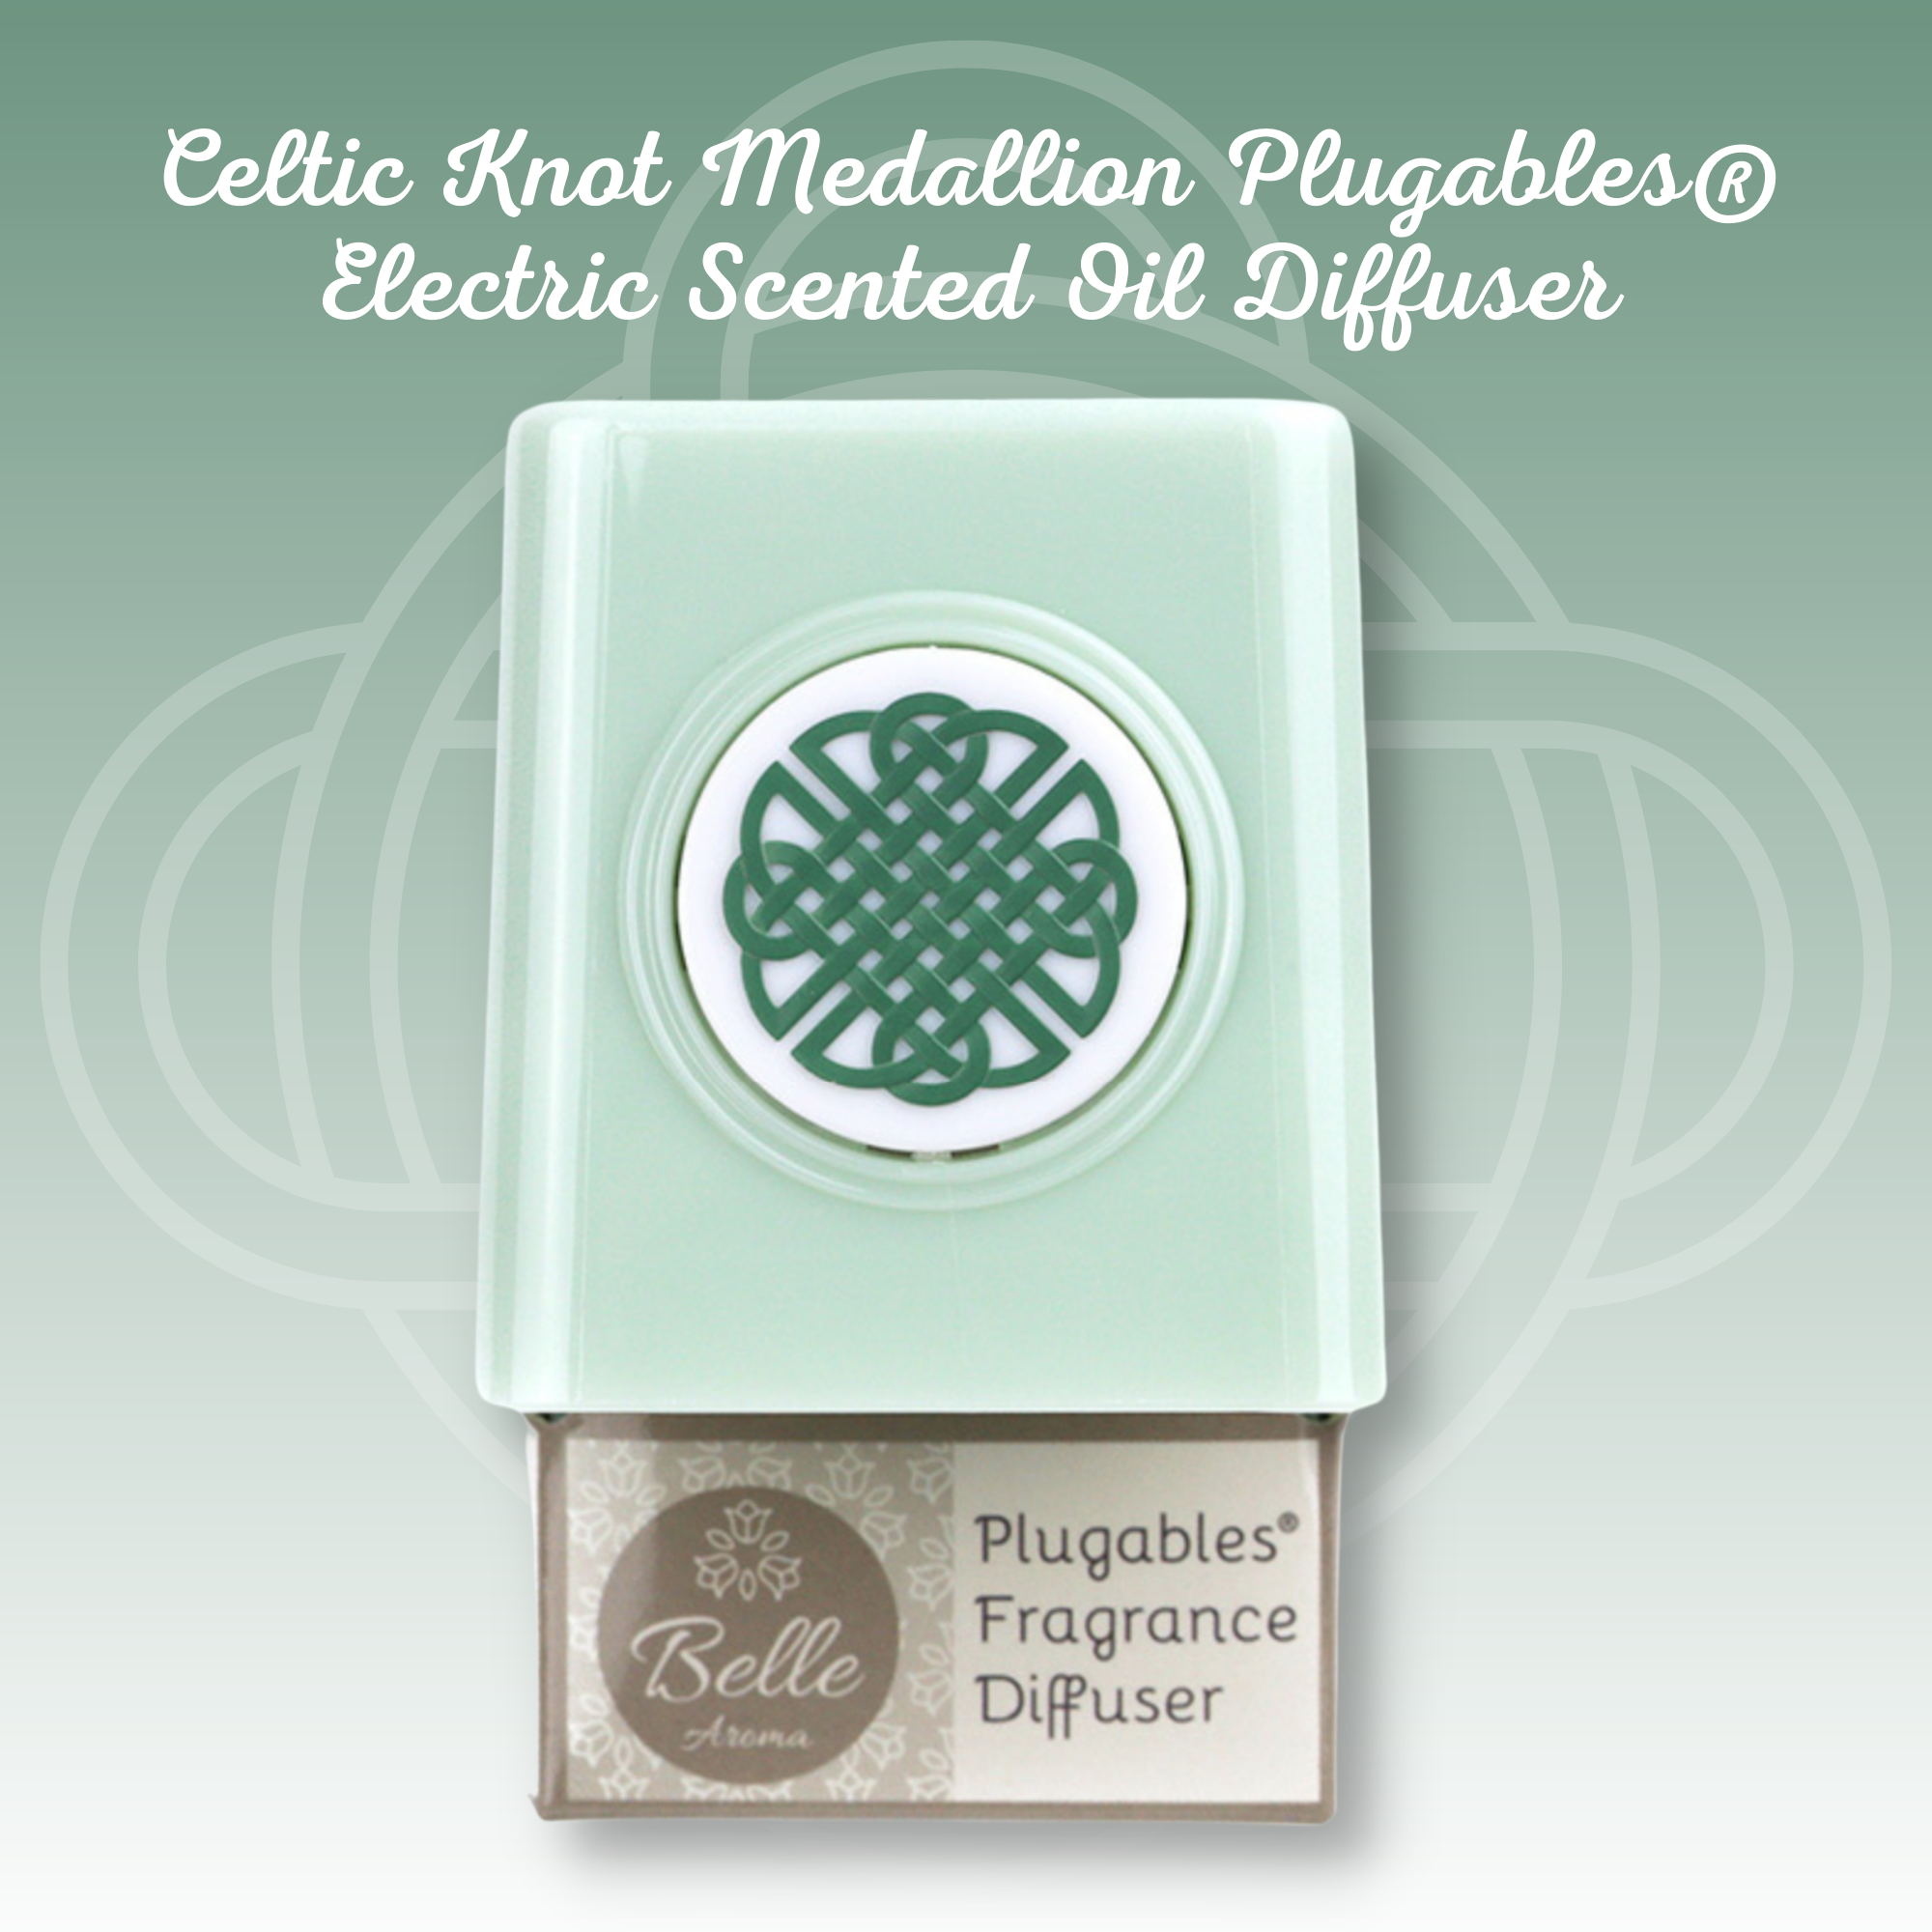 Celtic Knot Medallion Plugables® Plugin Aromalectric® Scented Oil Diffuser - Sea Glass  Home Fragrance Accessories